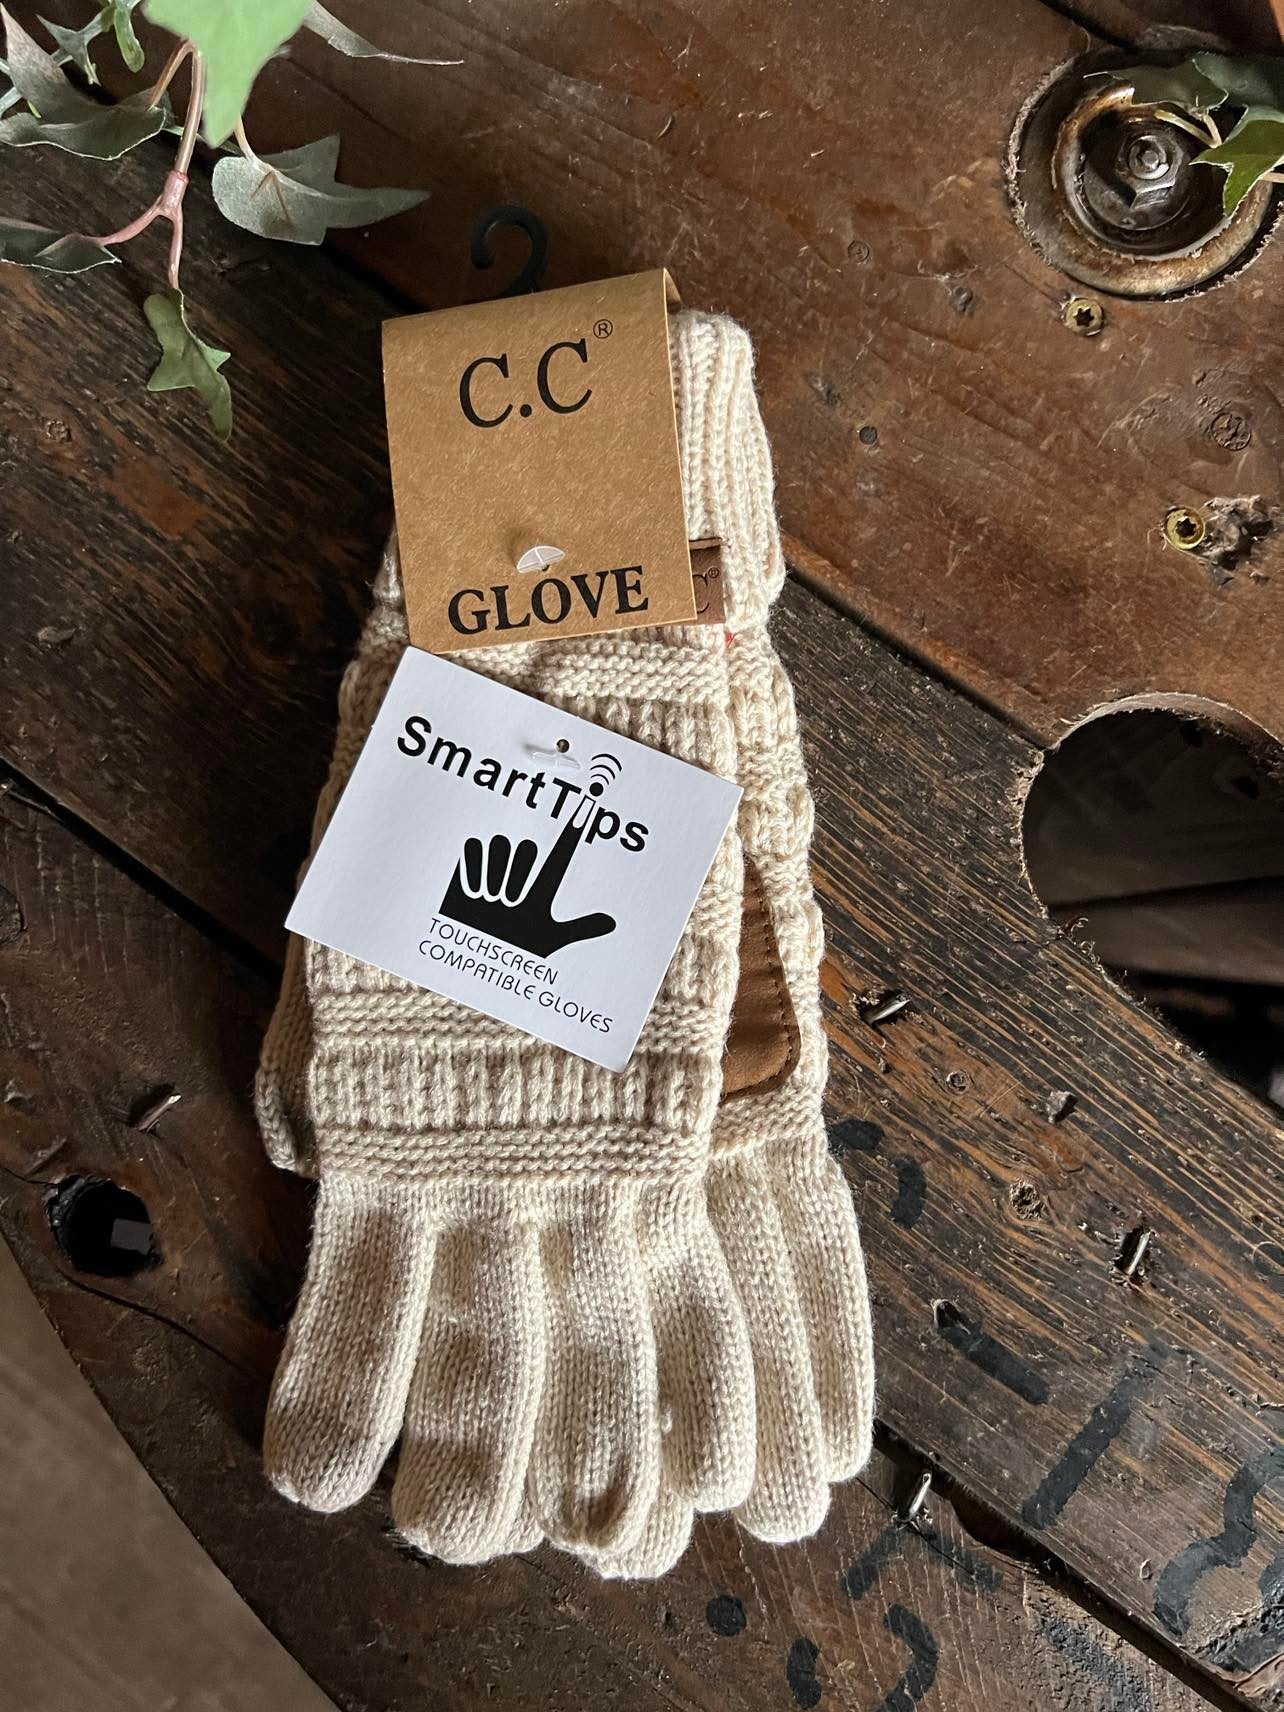 CC Beanies Gloves - Unlined-Beanie/Gloves-C.C Beanies-Lucky J Boots & More, Women's, Men's, & Kids Western Store Located in Carthage, MO